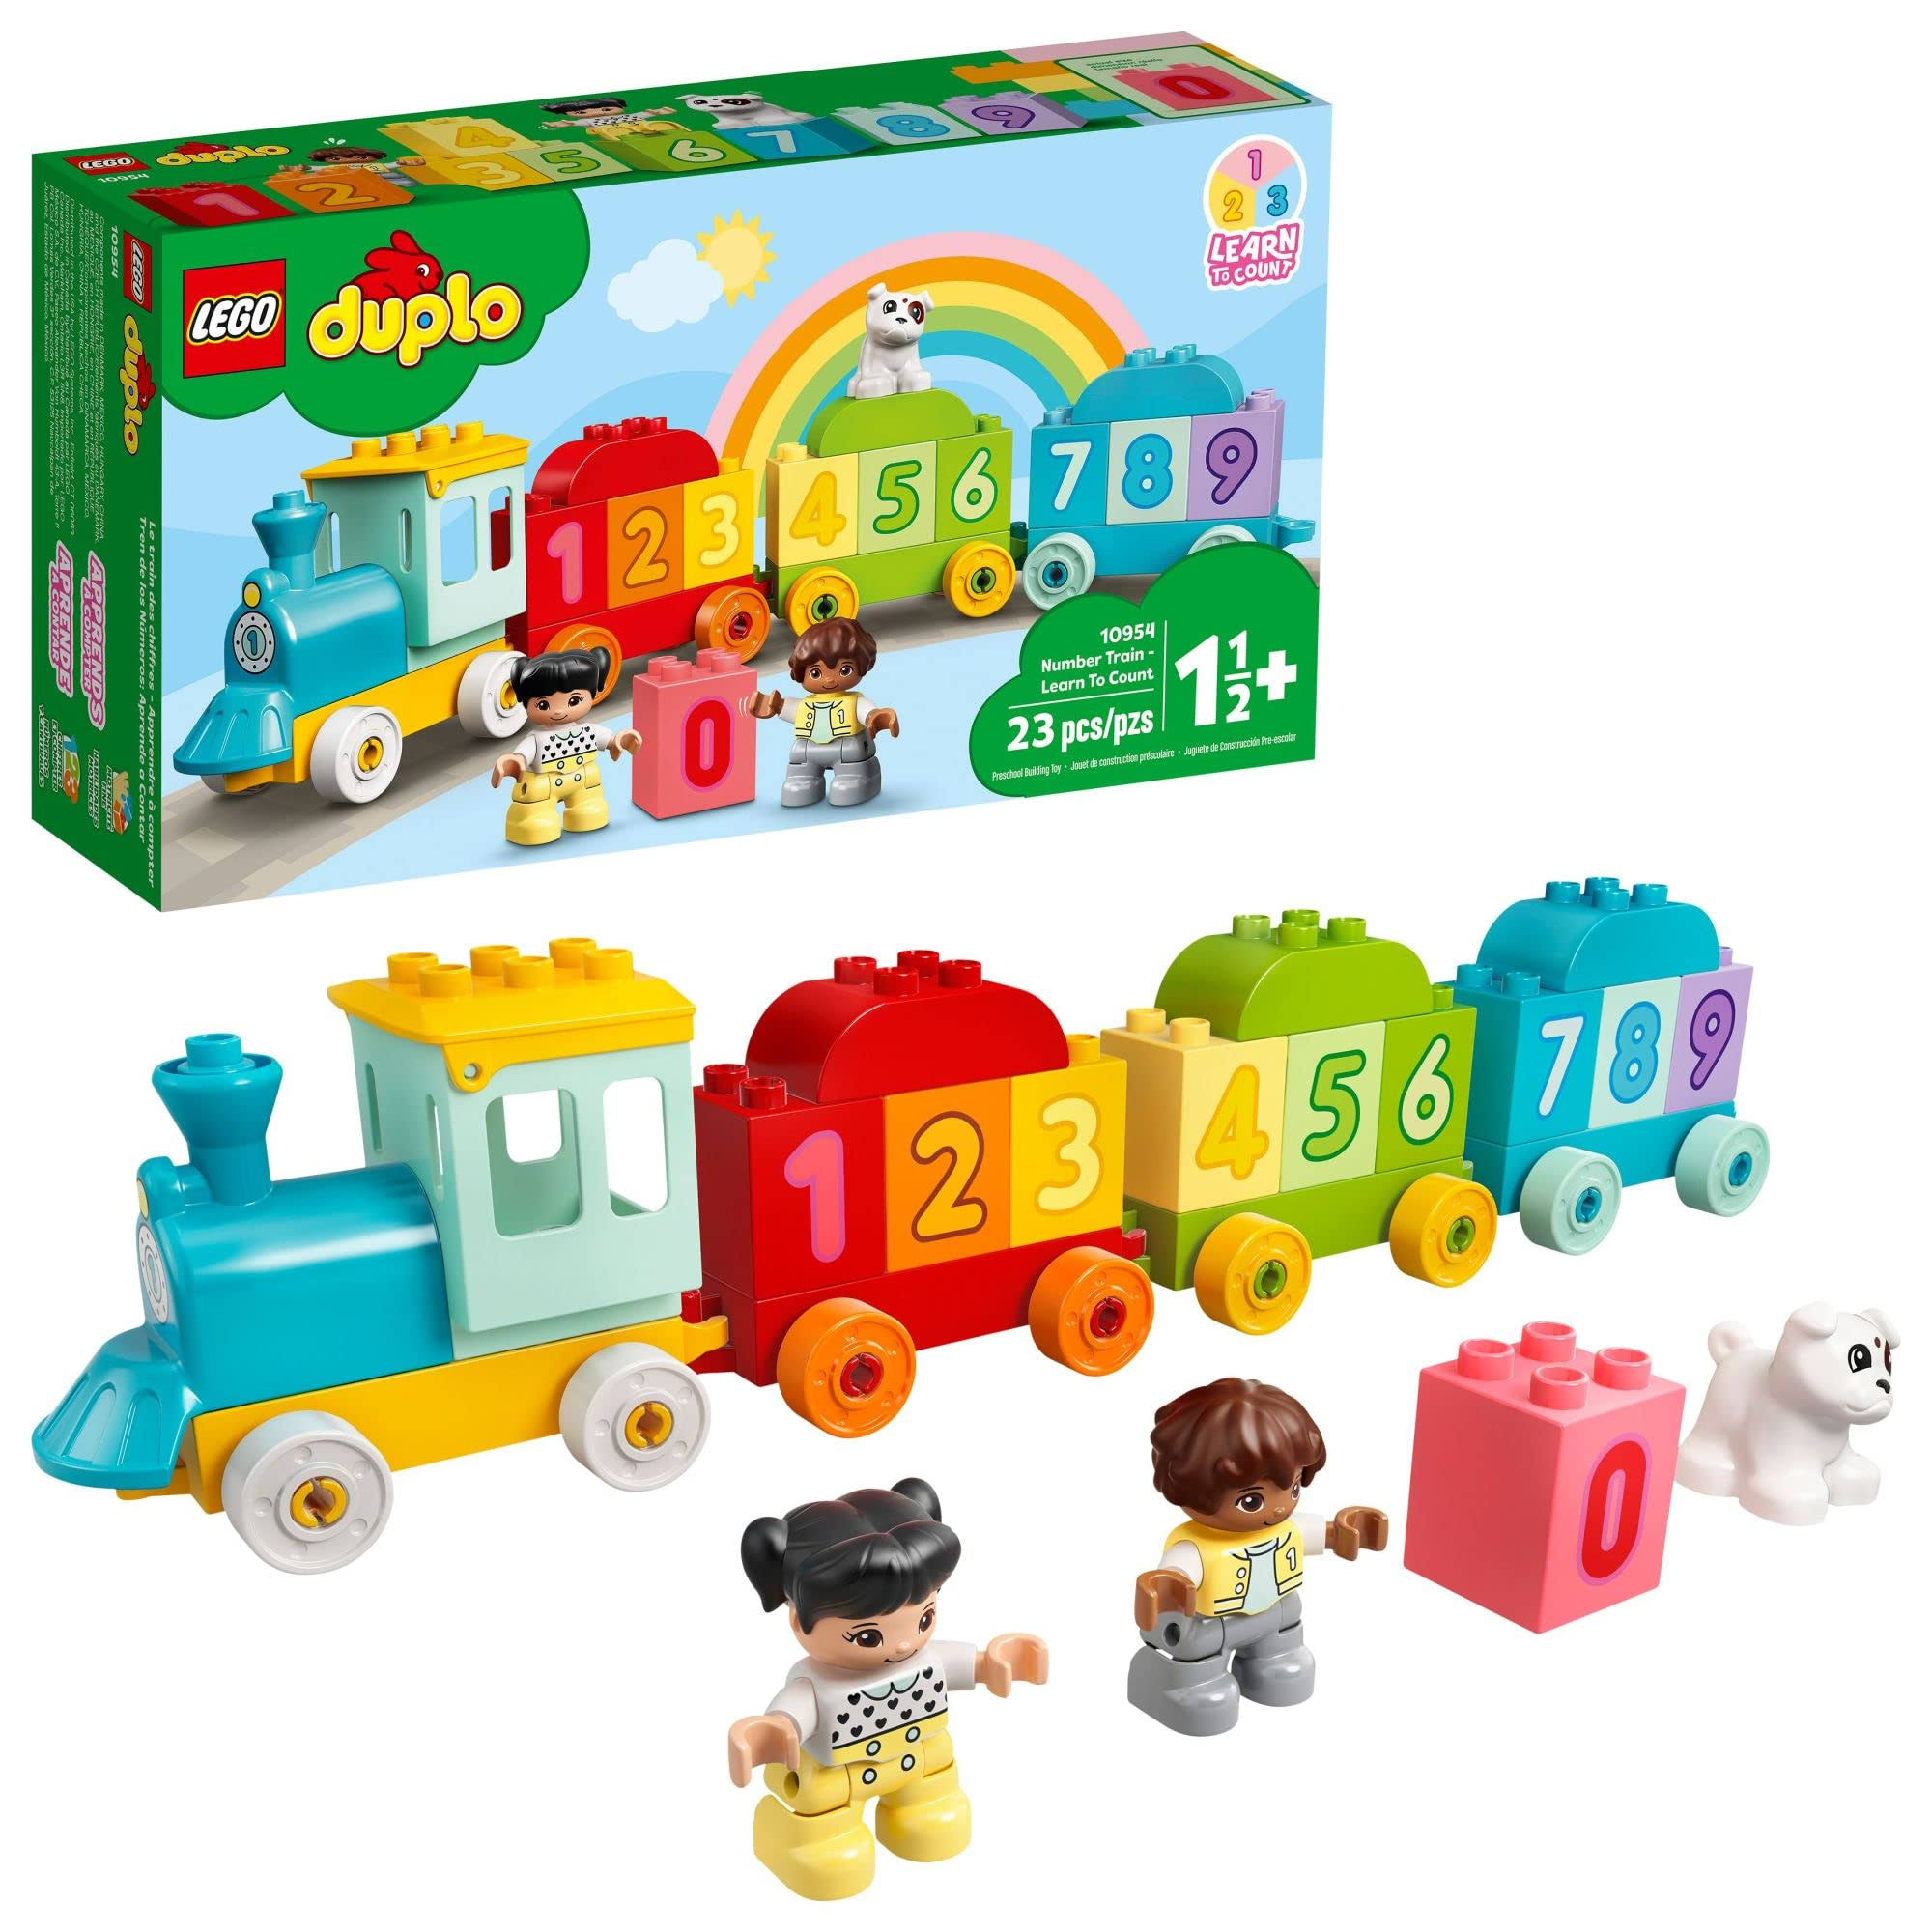 Lego 10954 Duplo Number Train Learn to Count